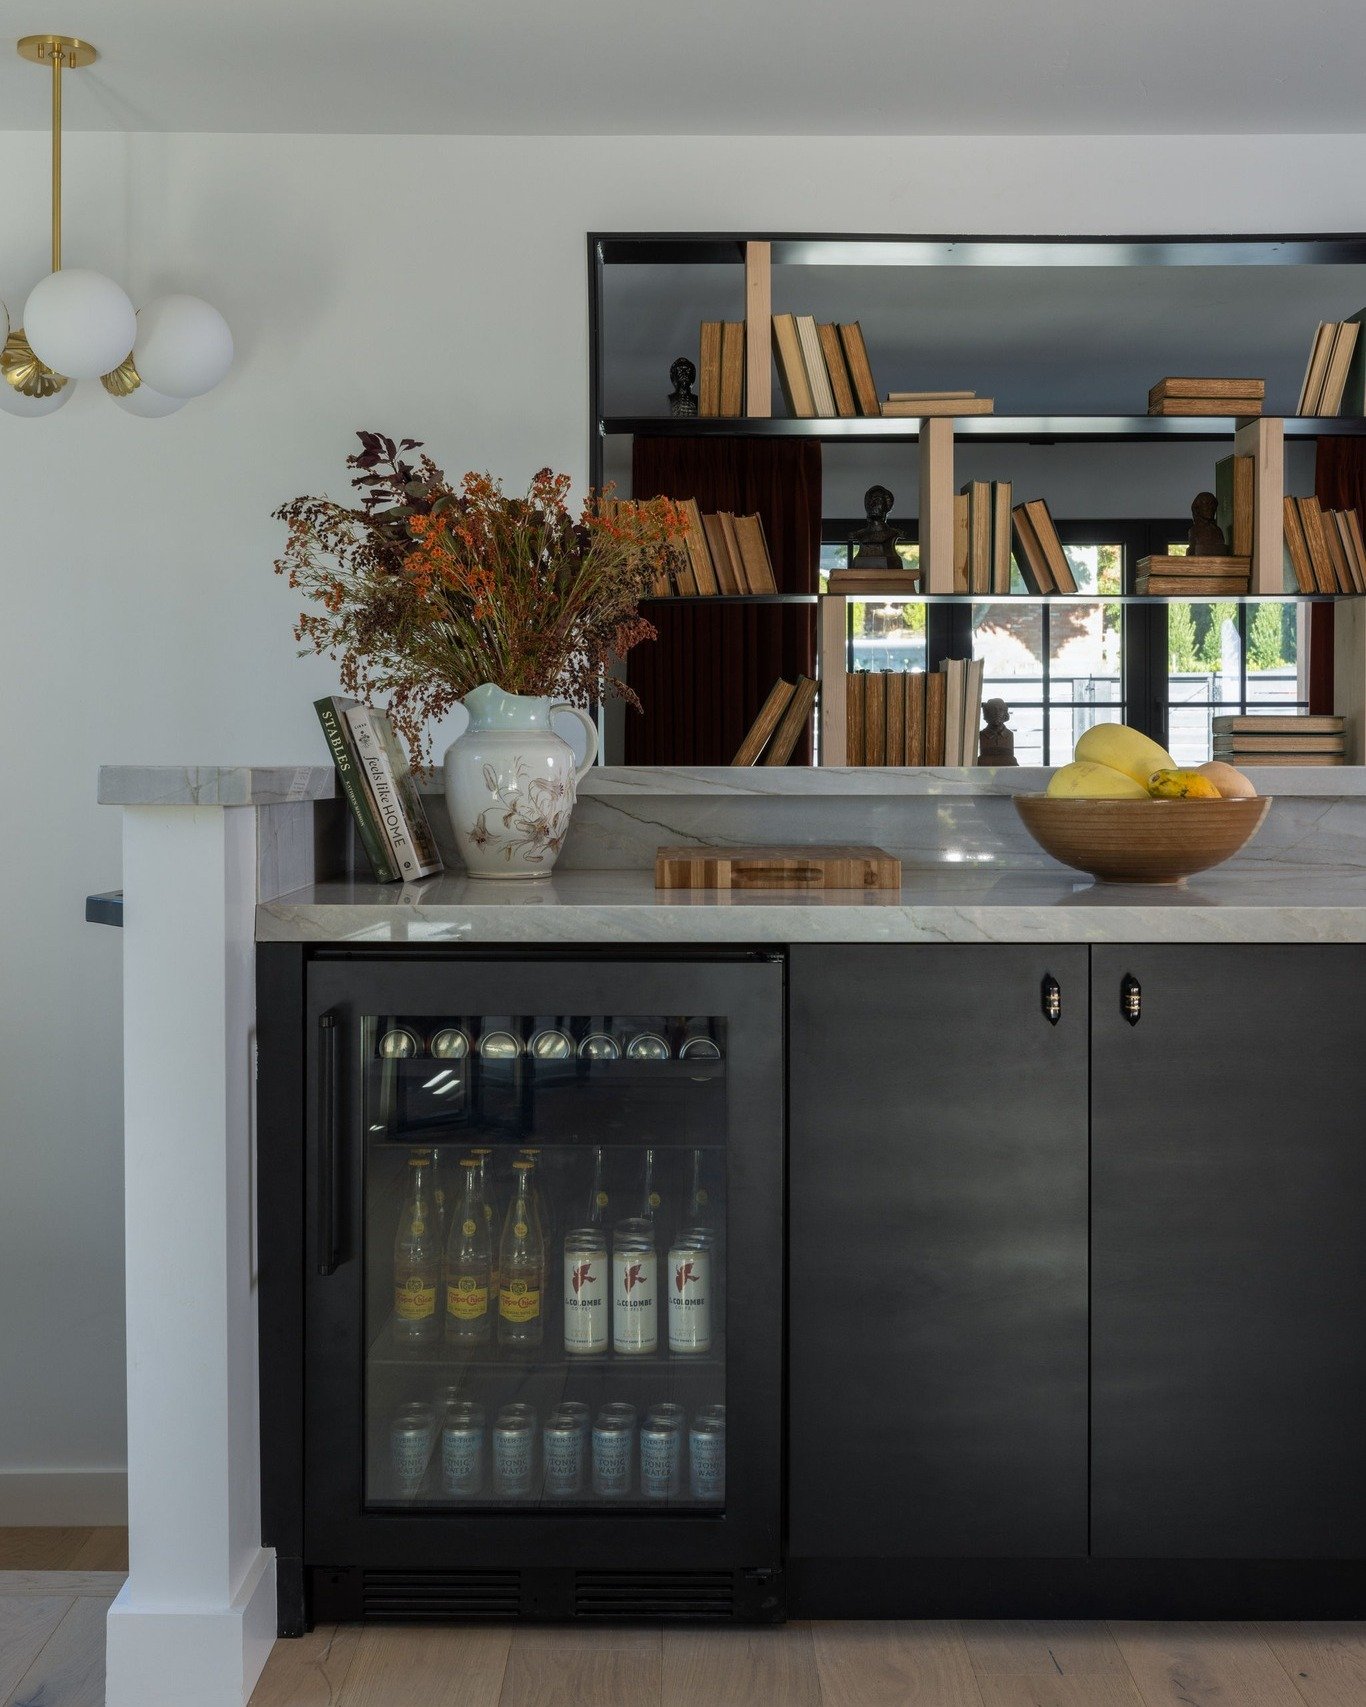 When a kitchen has a disconnected space, our first thought is to create a bar or beverage station. It gives a gathering place that is out of the way of the food prep and enlarges the kitchen footprint.

We opened the wall above the bar and added meta